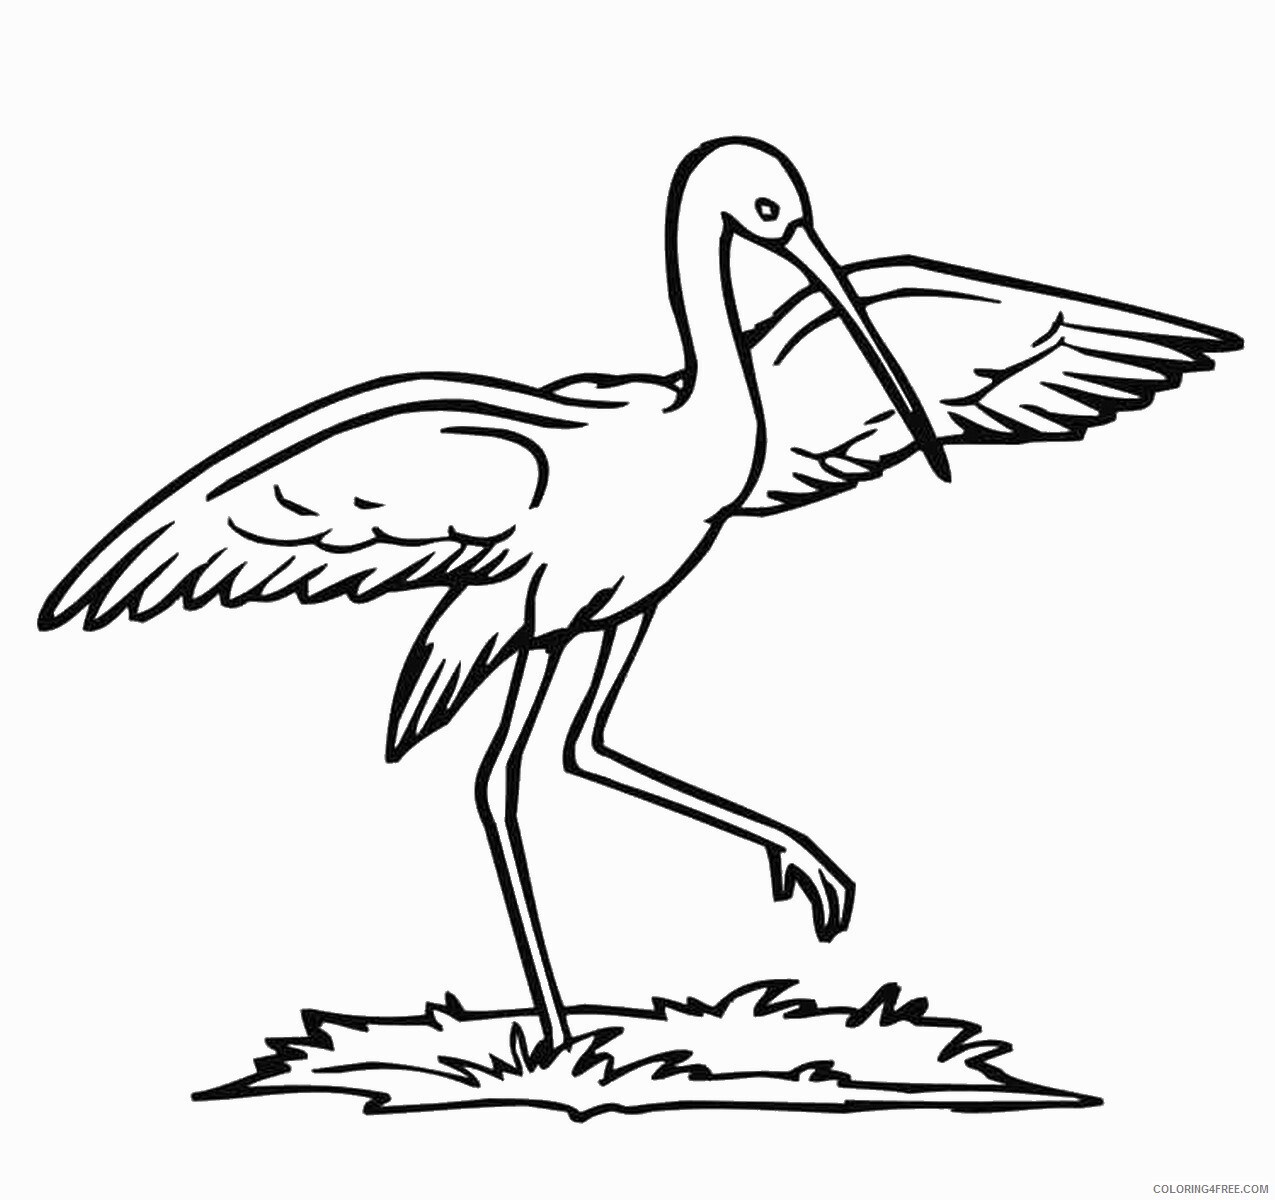 Stork Coloring Pages Animal Printable Sheets storks 8 2021 4724 Coloring4free